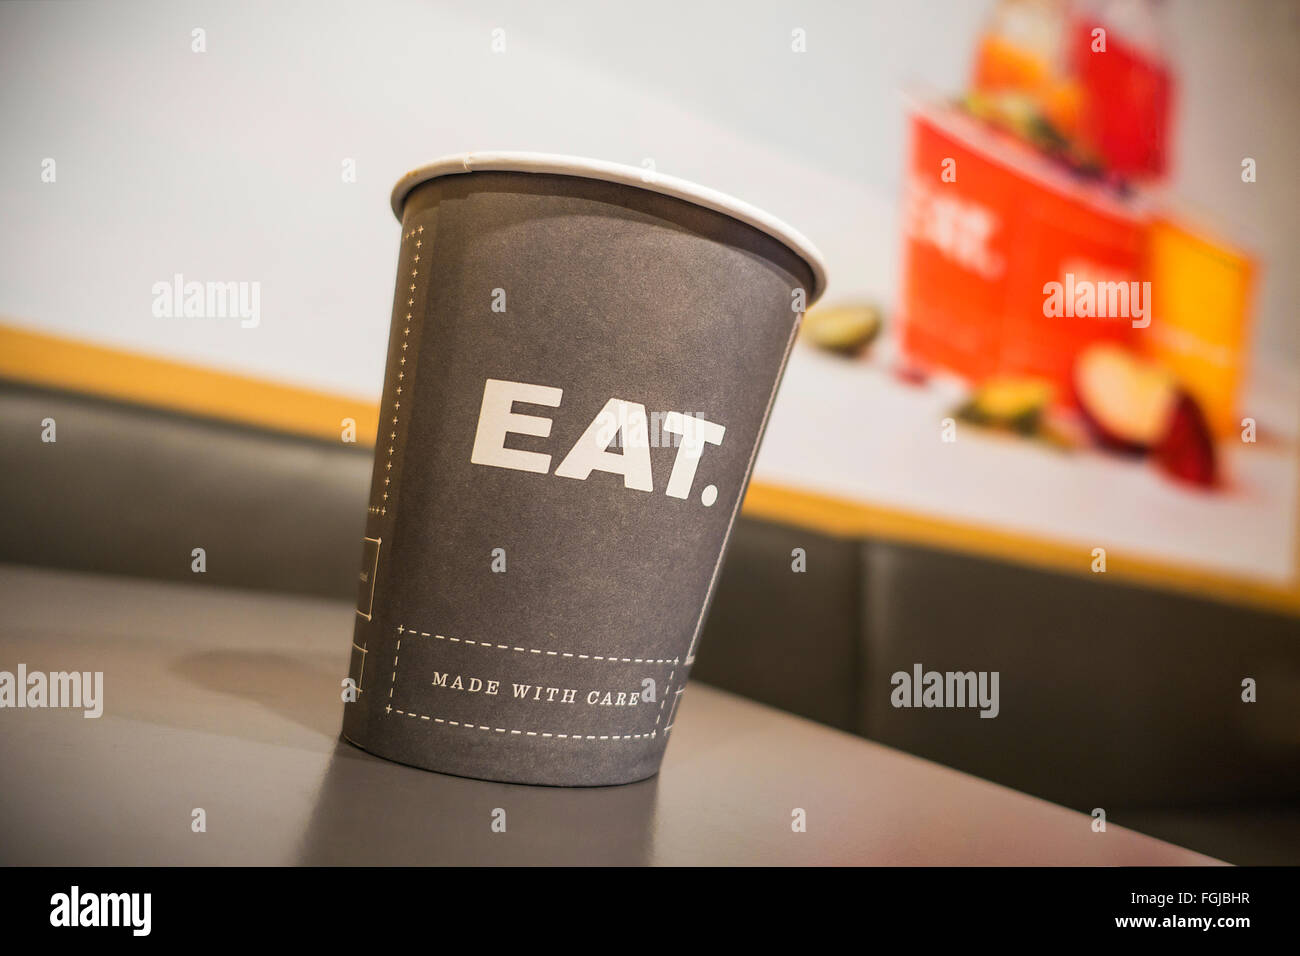 Eat Coffee Shop High Street Store Eatery Chain Stock Photo